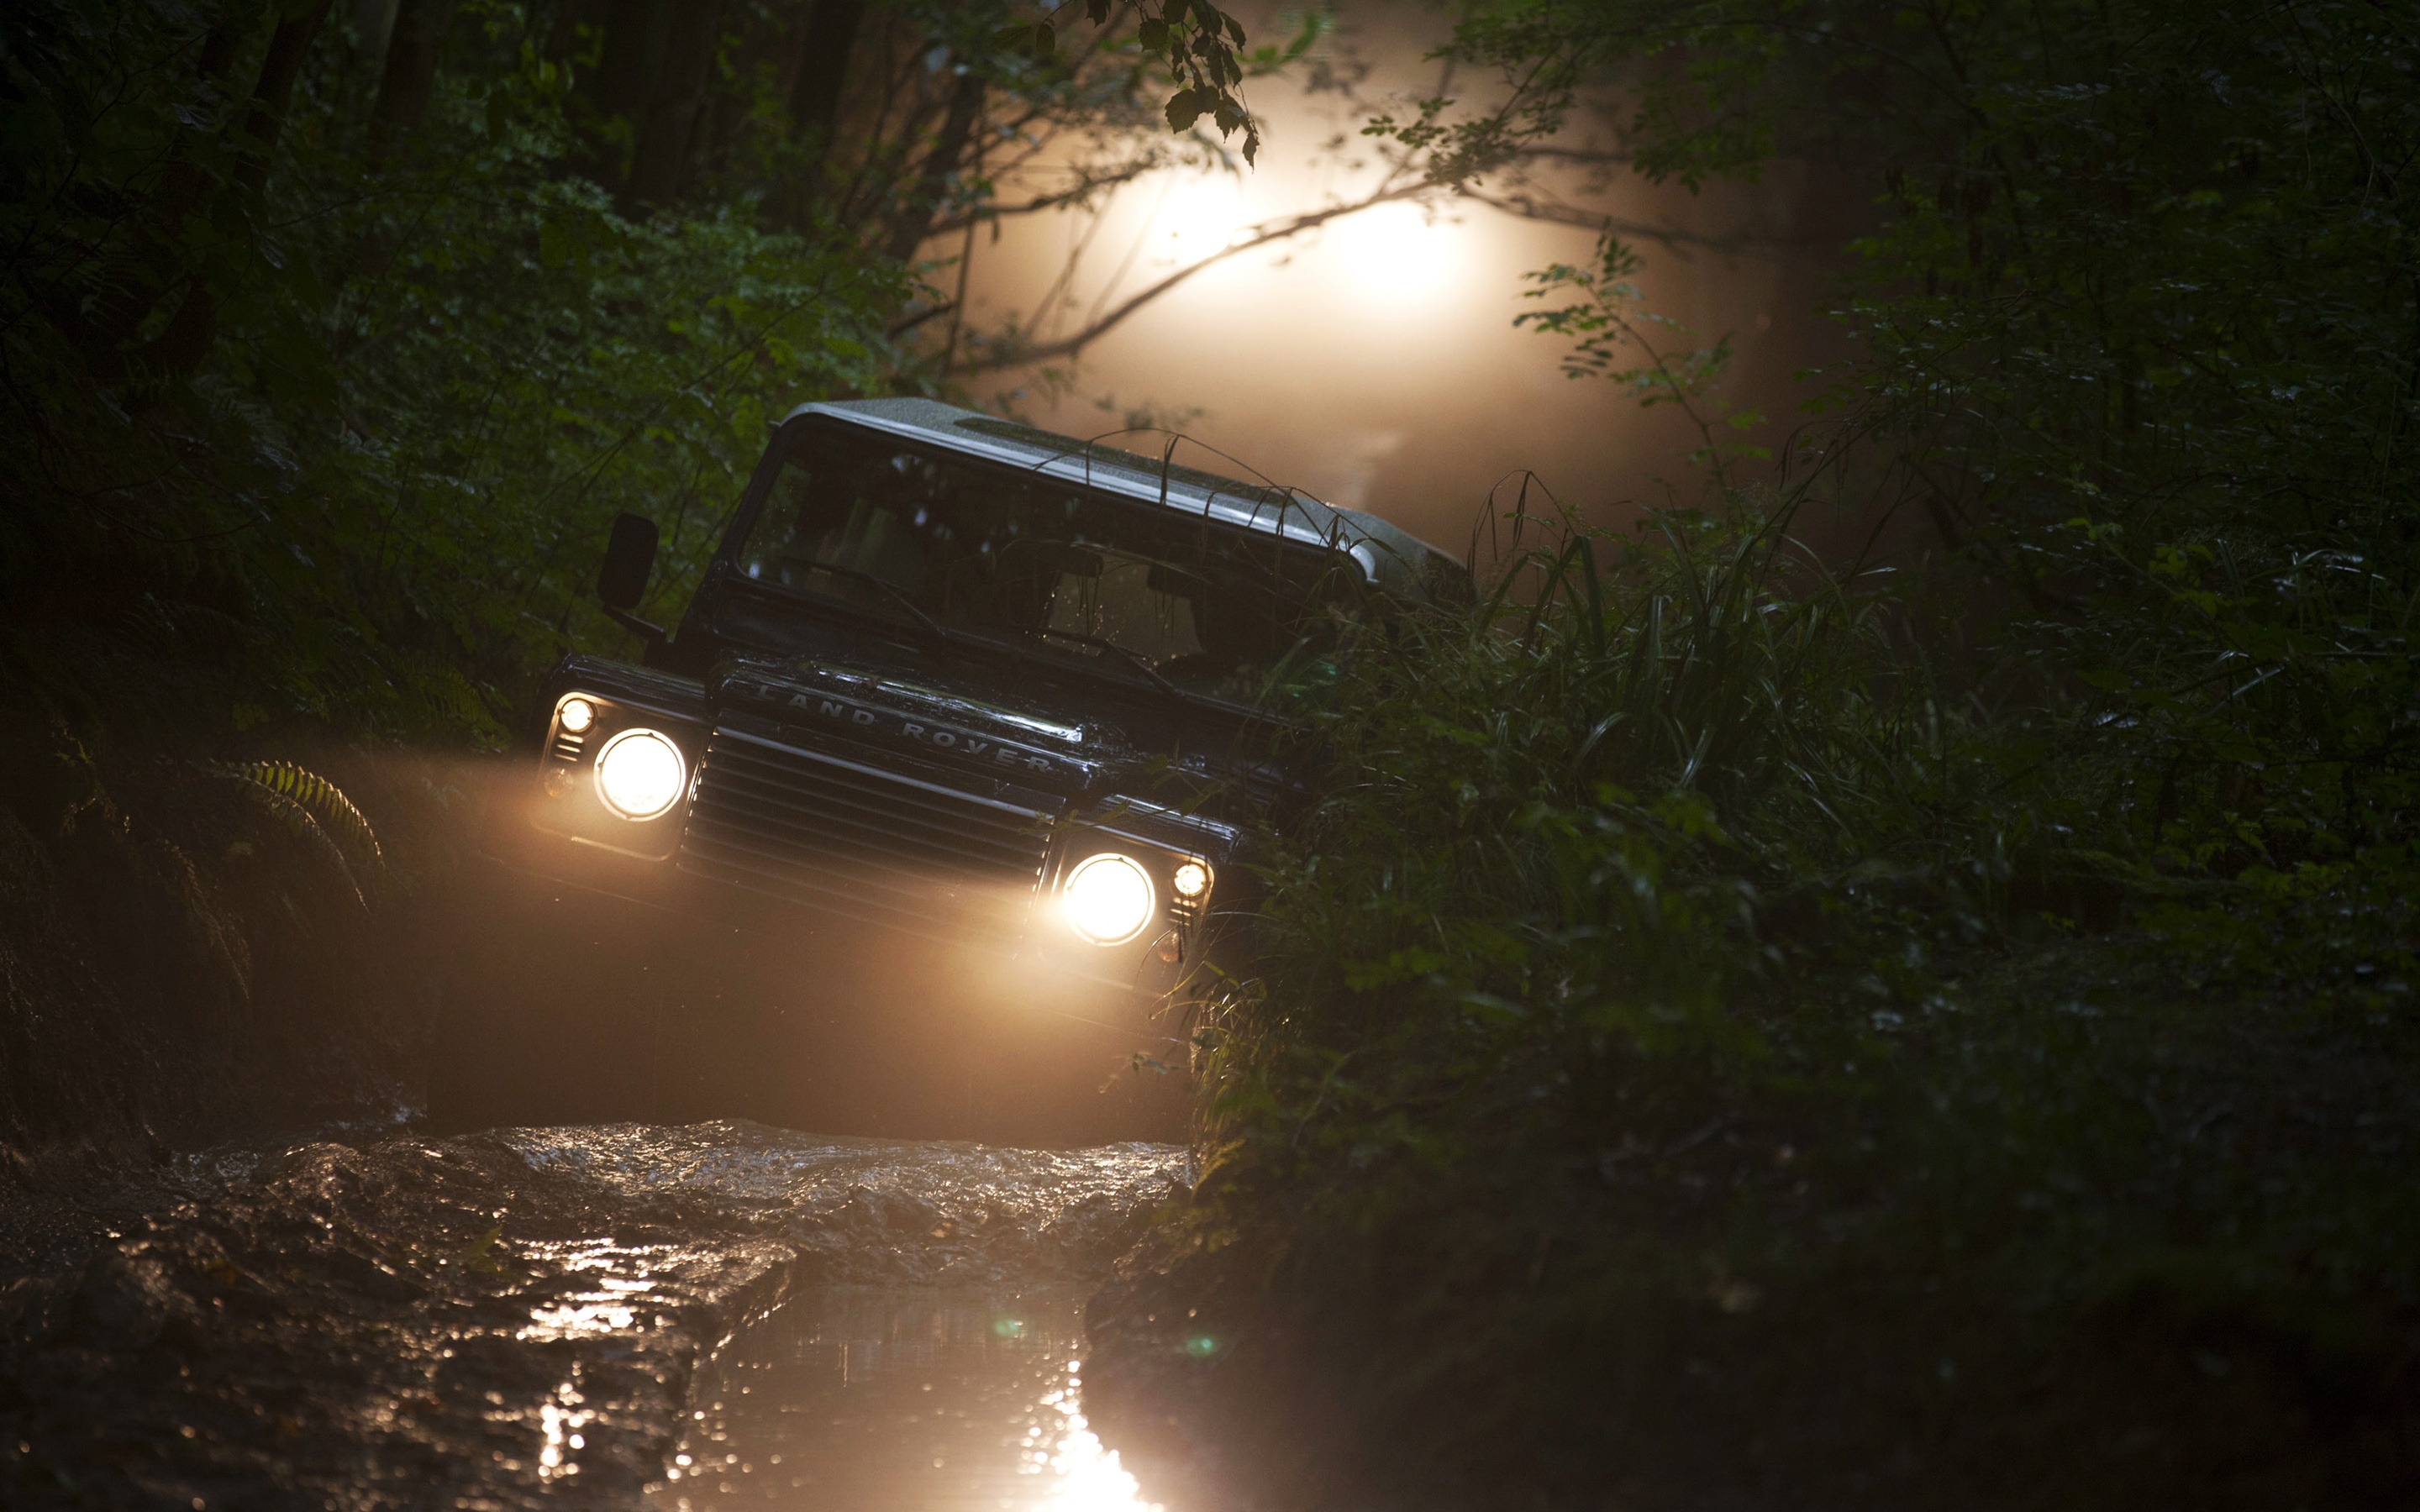 Land Rover Defender Off Road for 2880 x 1800 Retina Display resolution